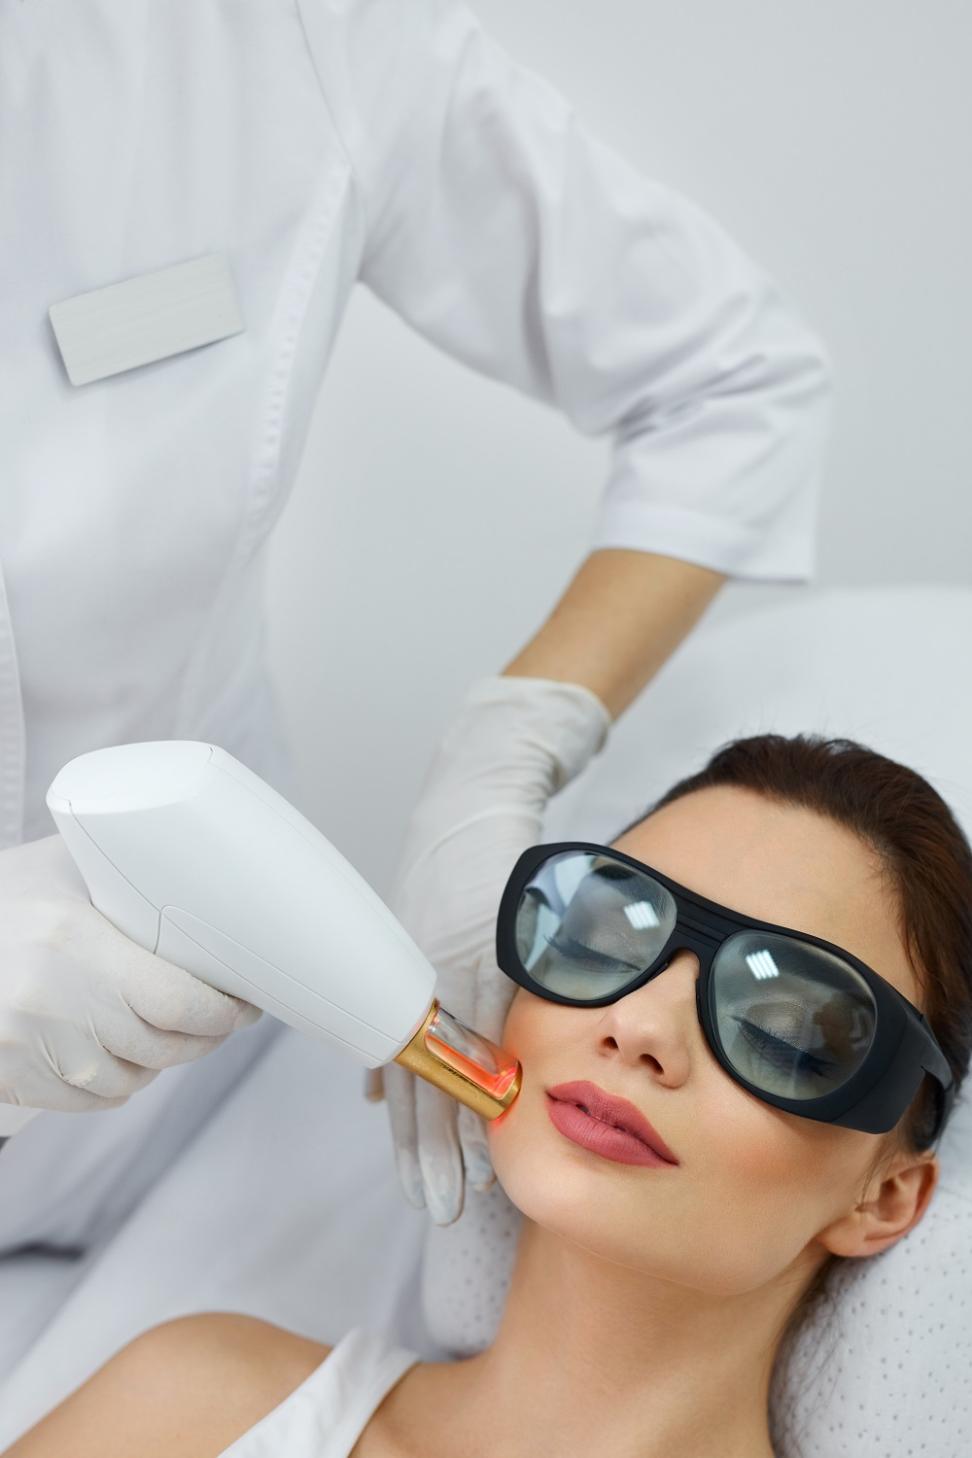 Chemical Beauty Which Peels: Microneedling